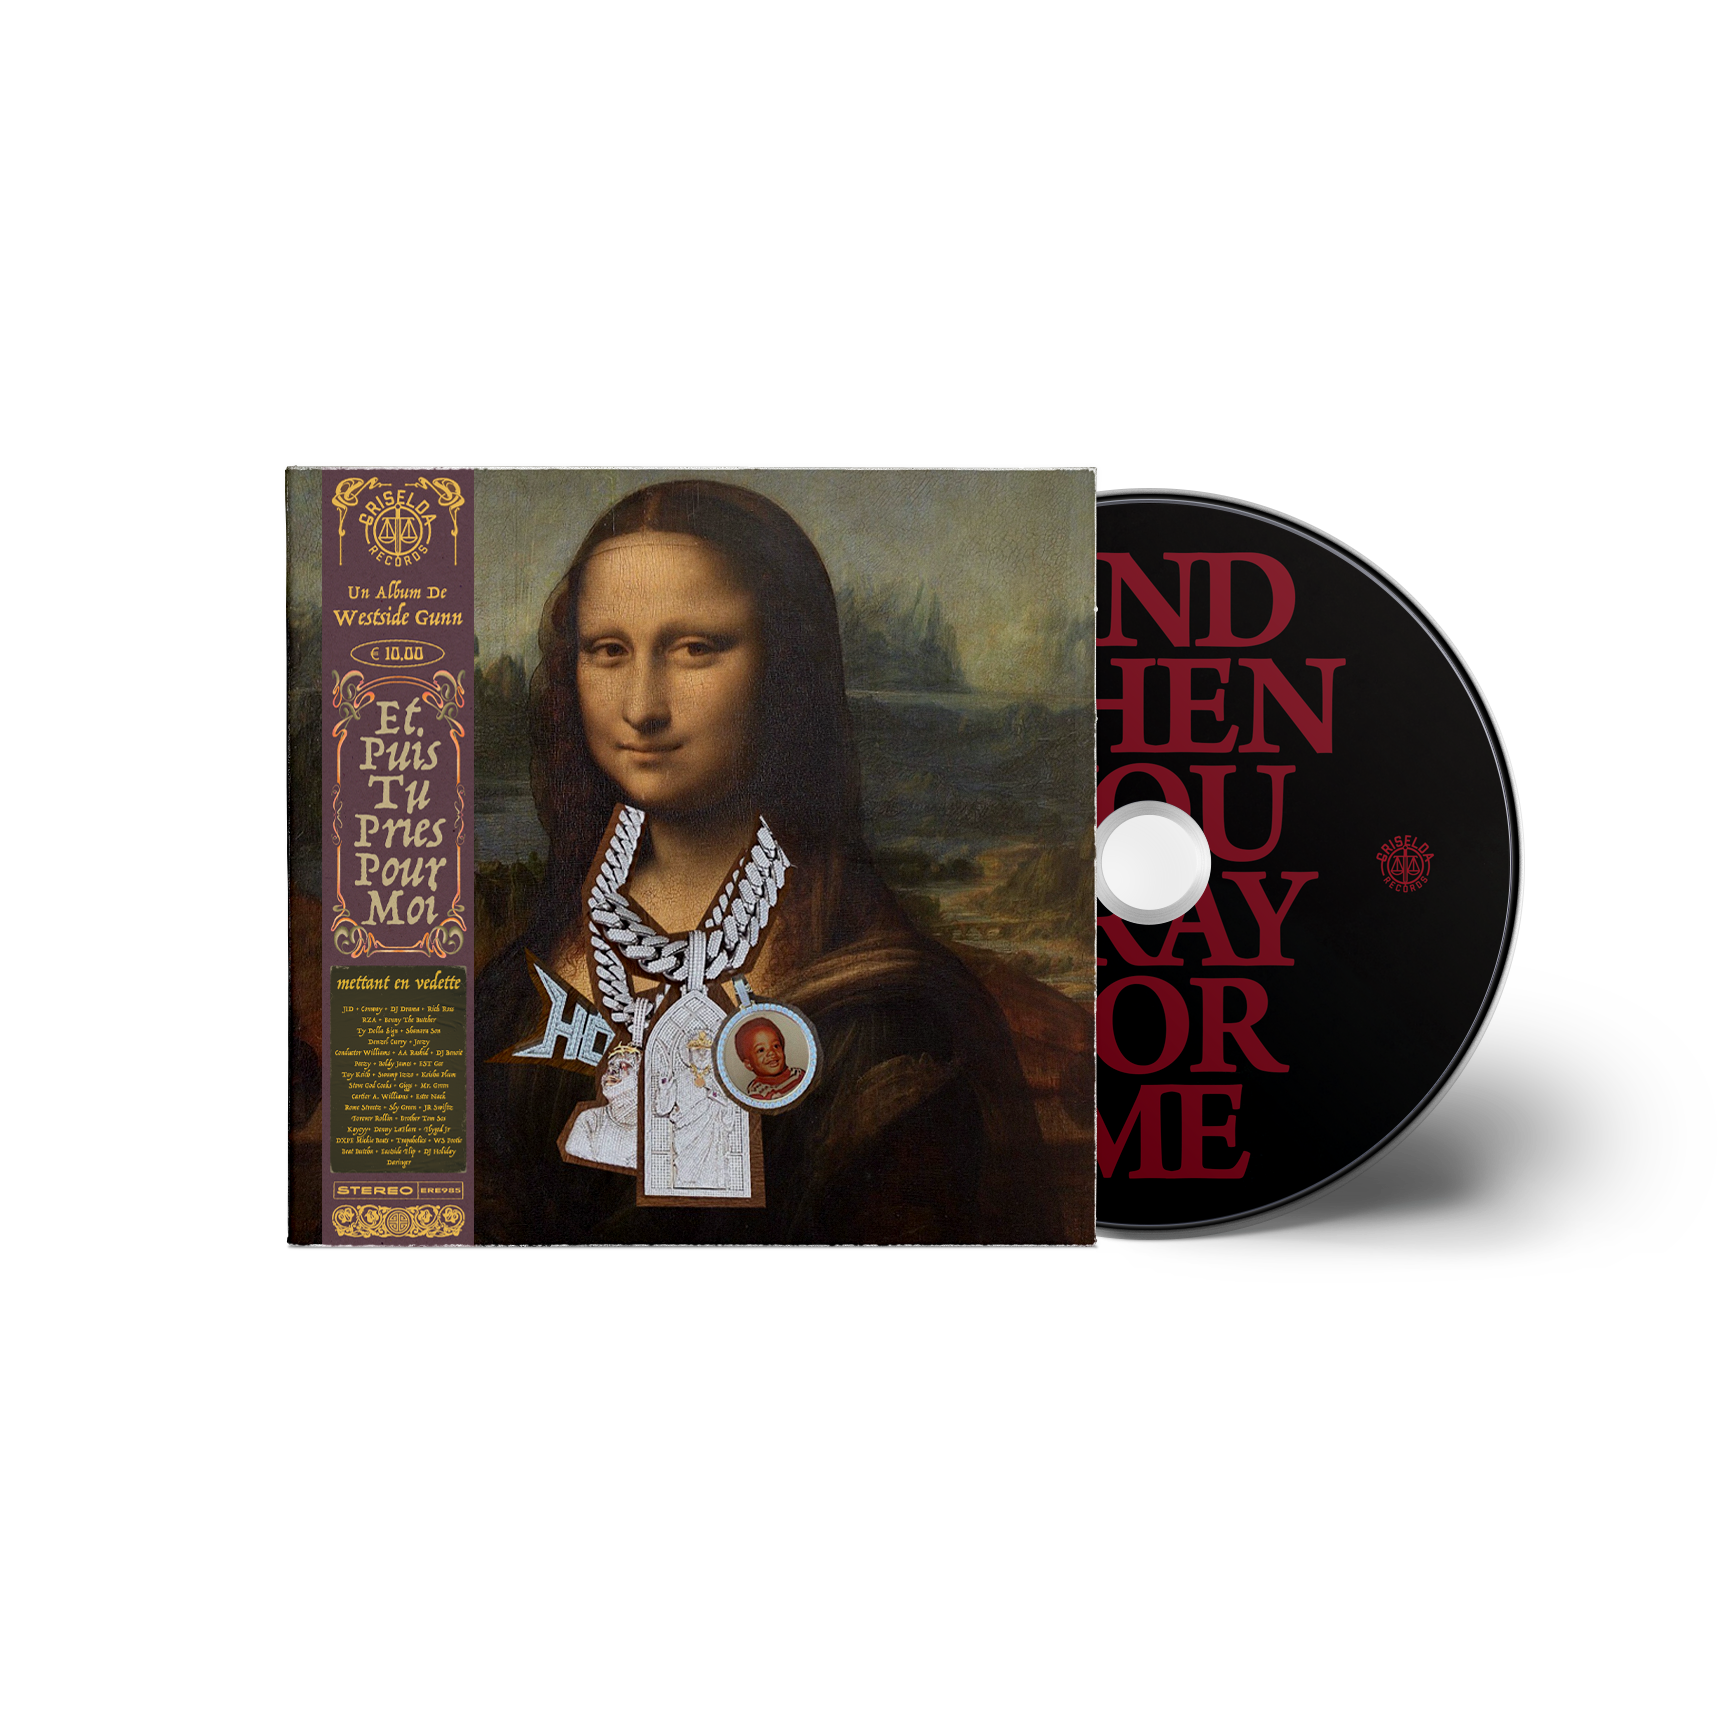 Westside Gunn - AND THEN YOU PRAY FOR ME CD - Mona Lisa Cover – EMPIRE